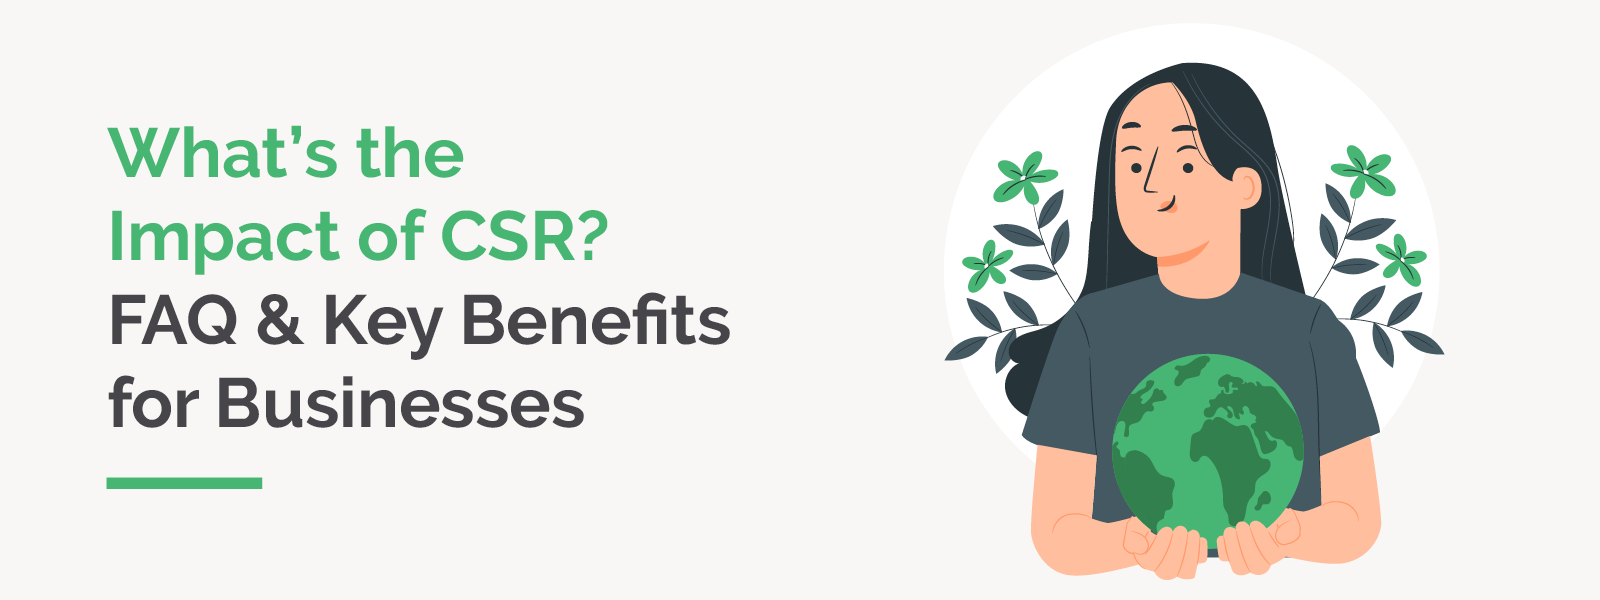 What's the Impact of CSR? FAQ & Key Benefits for Businesses